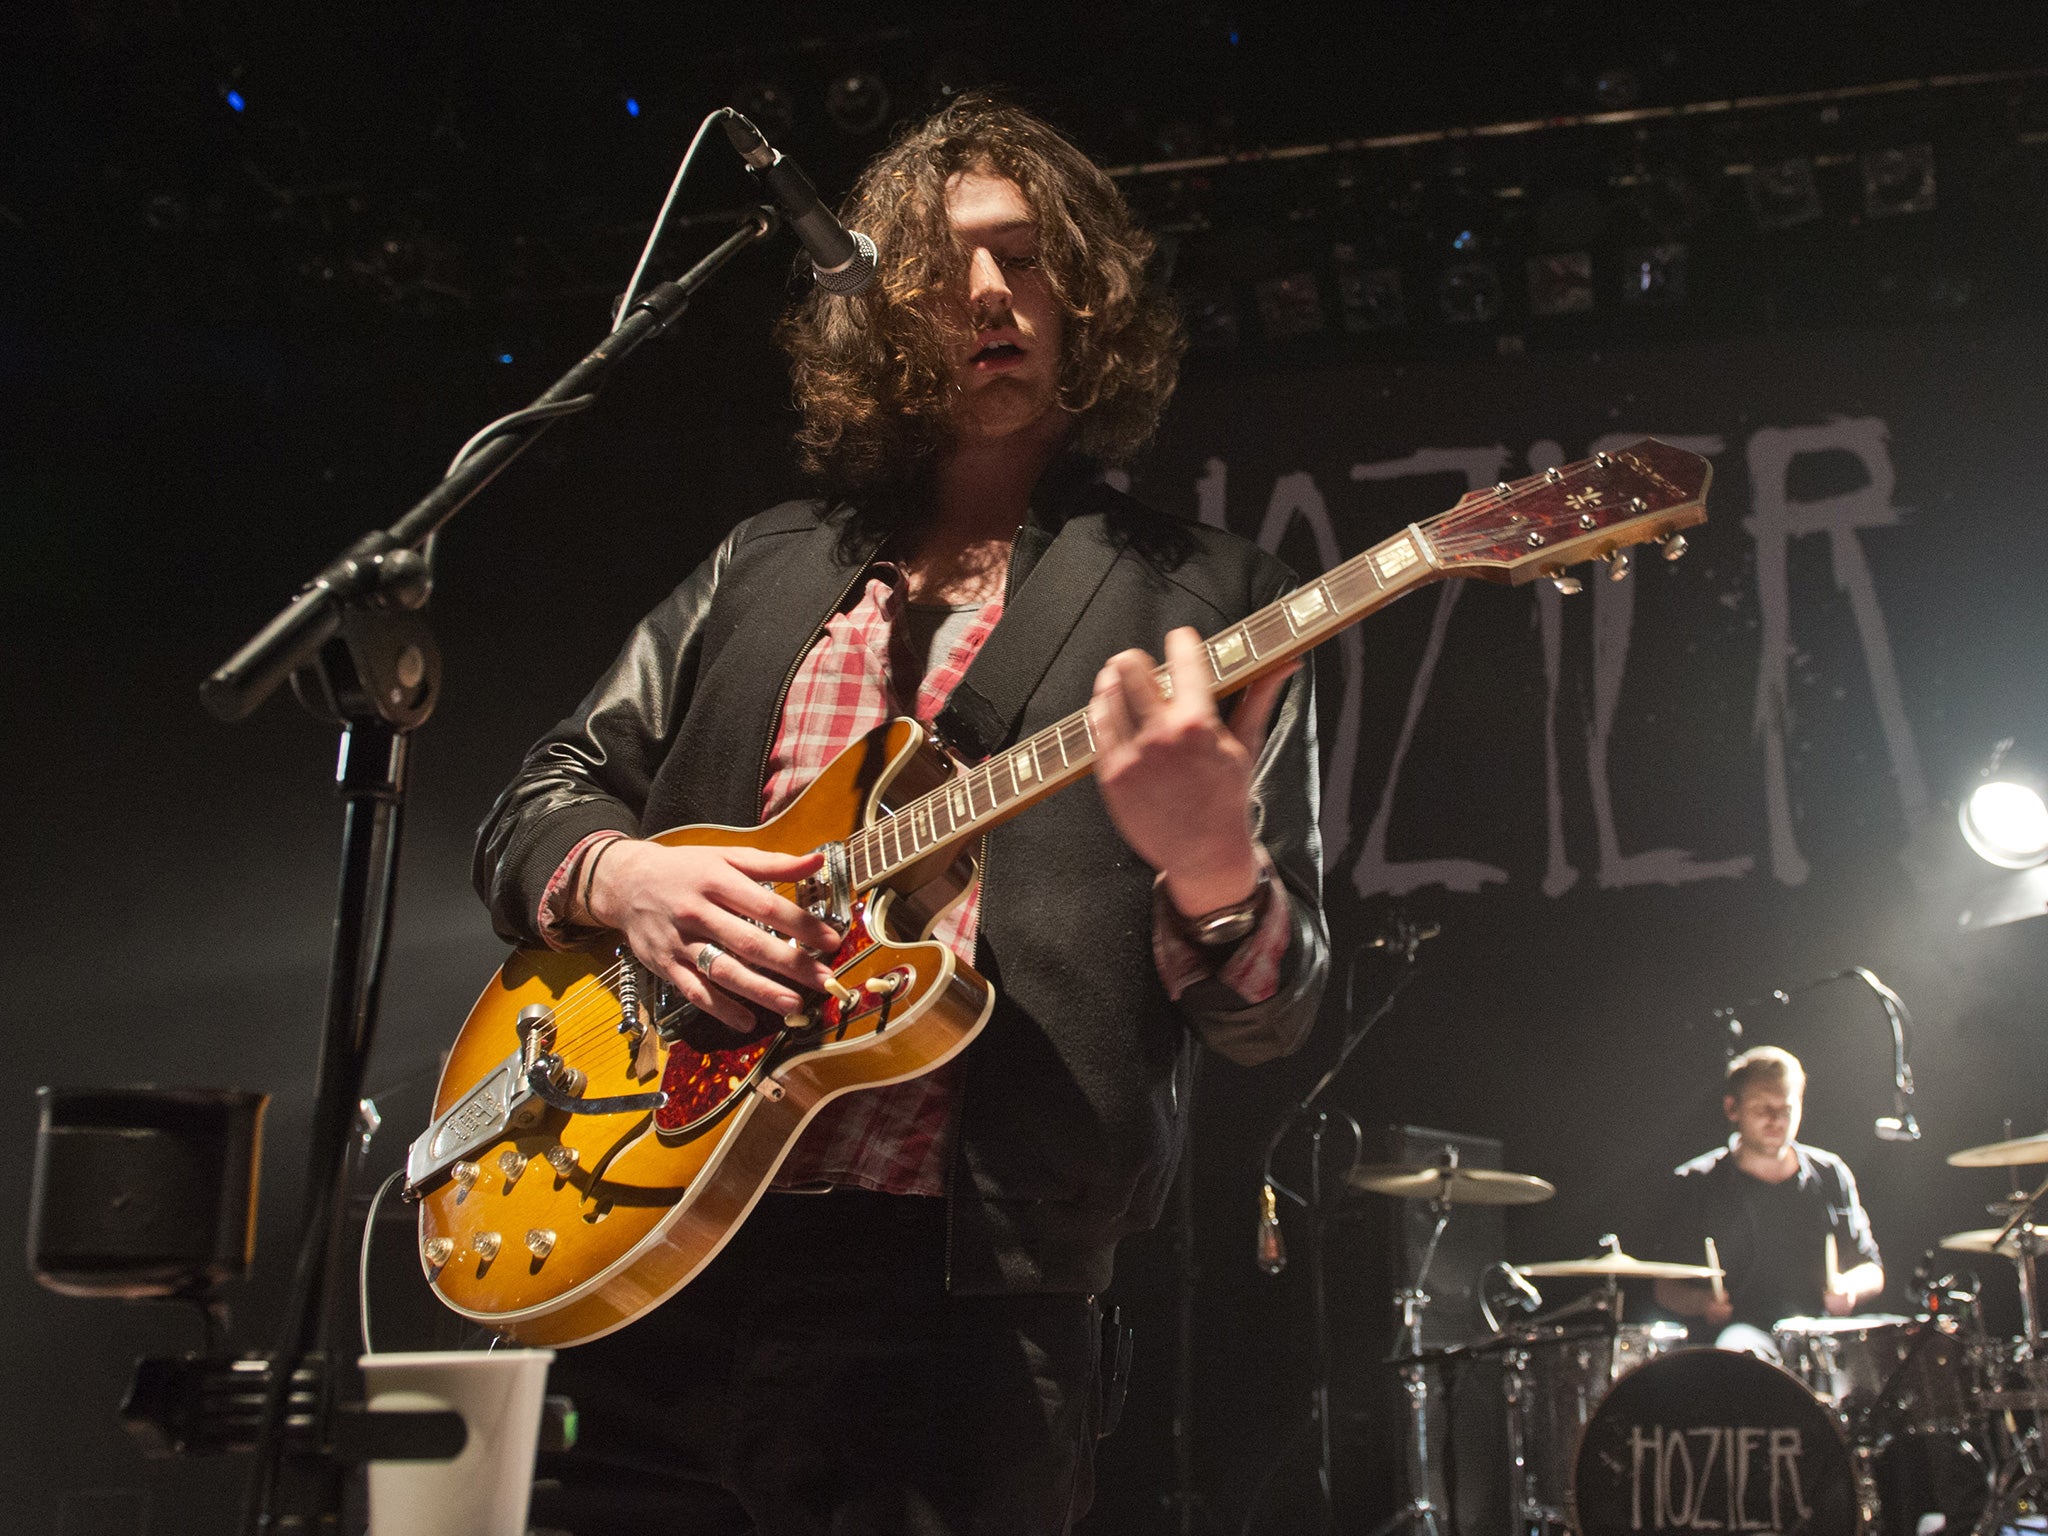 Hozier performing at the Shepherd's Bush Empire in London